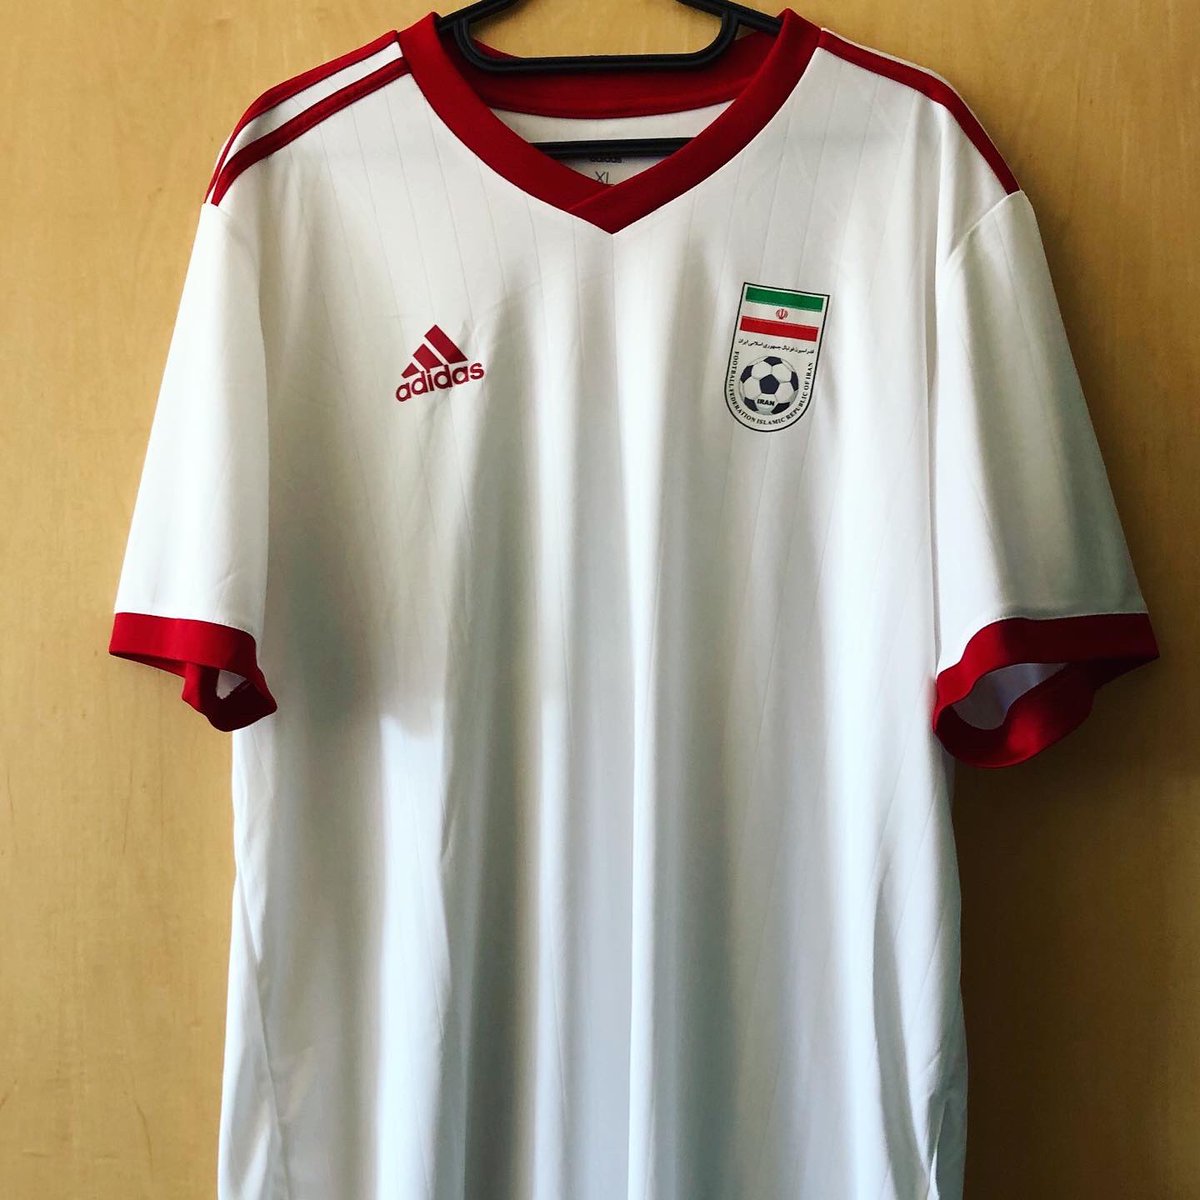 IranHome Kit, 2018Adidas, unofficial replicaI started seriously getting into football shirts by deciding I’d start collecting one from every country I’ve visited.Sadly, I didn’t buy one in Iran when I went there in 2015, so I got this from ebay, a decent enough replica